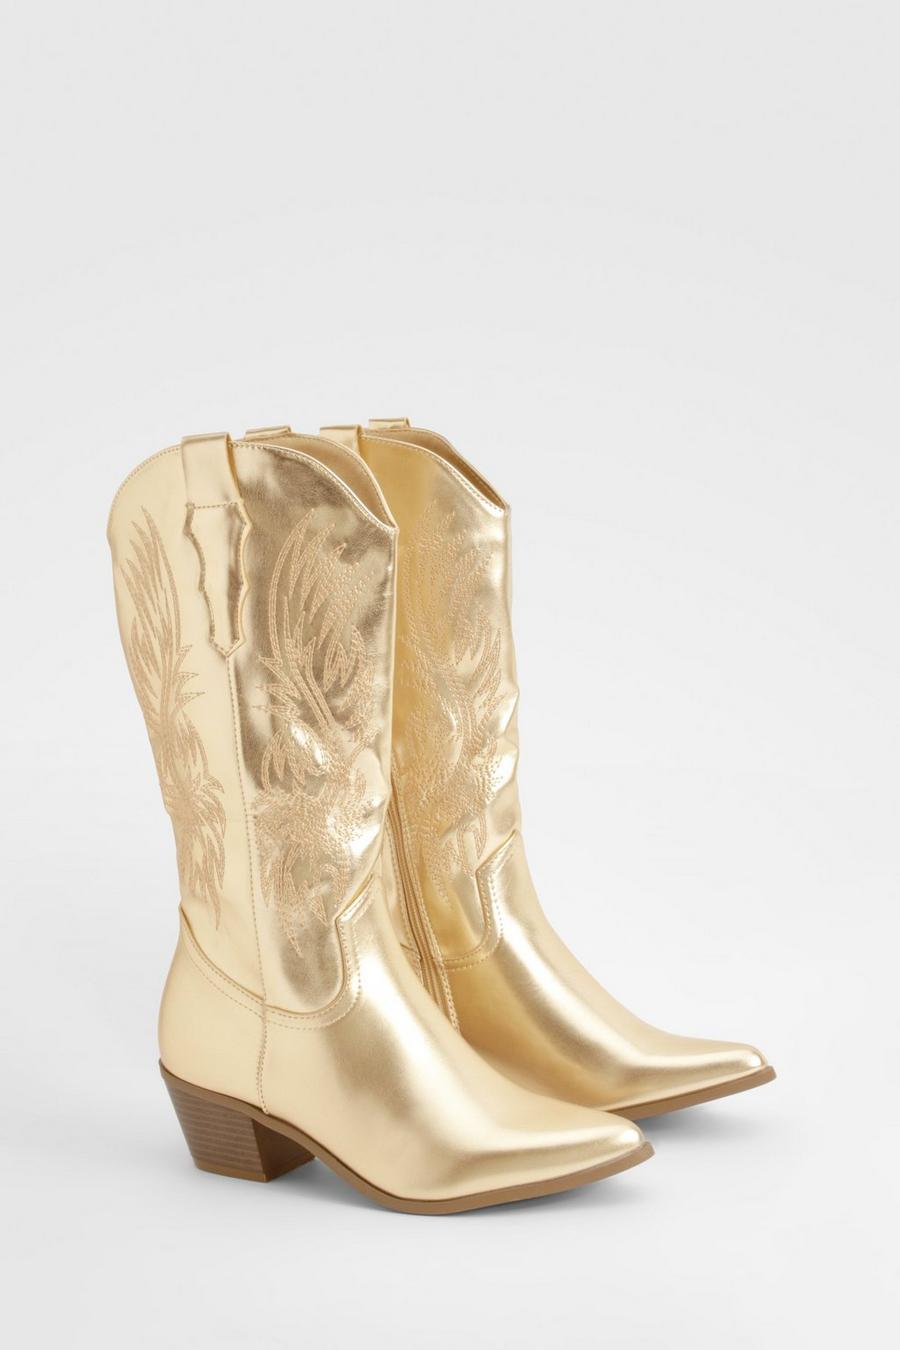 Gold Metallic Embroidered Calf High Western Boots 